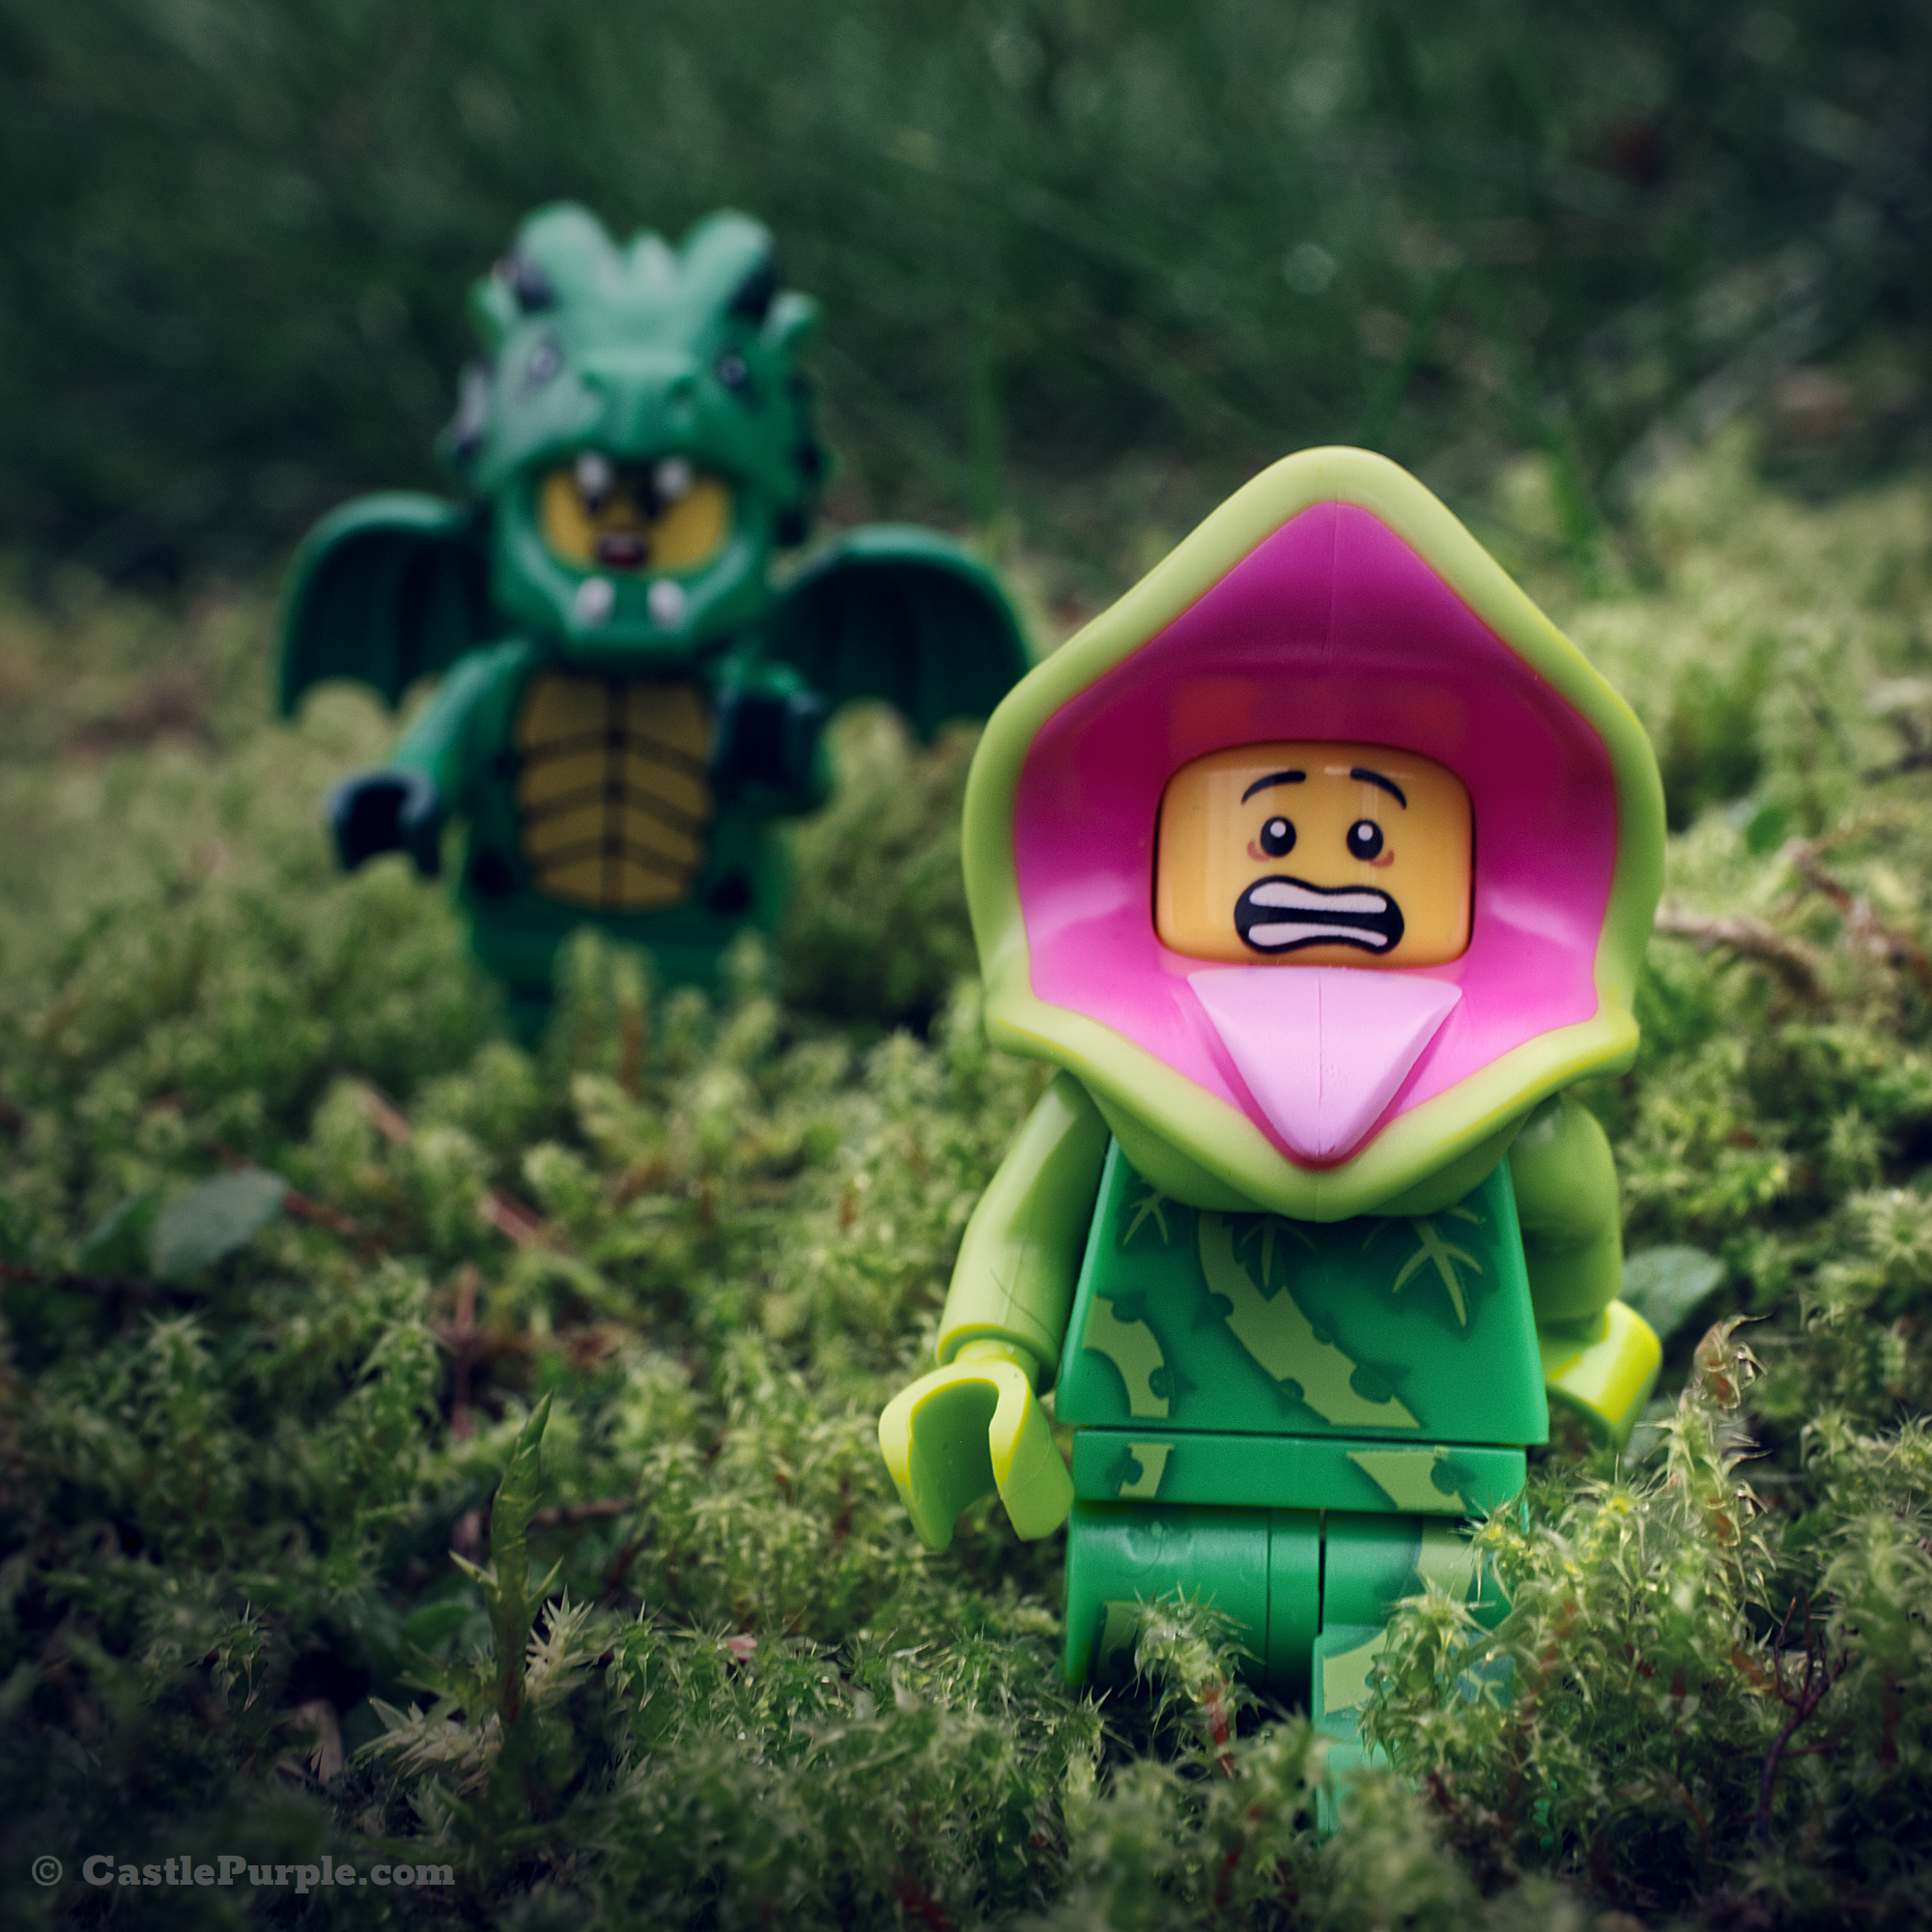 In the foreground is the Lego plant monster minifigure being chased by the green dragon mini-figure in the background. They are placed in a bushy, grassy environment.